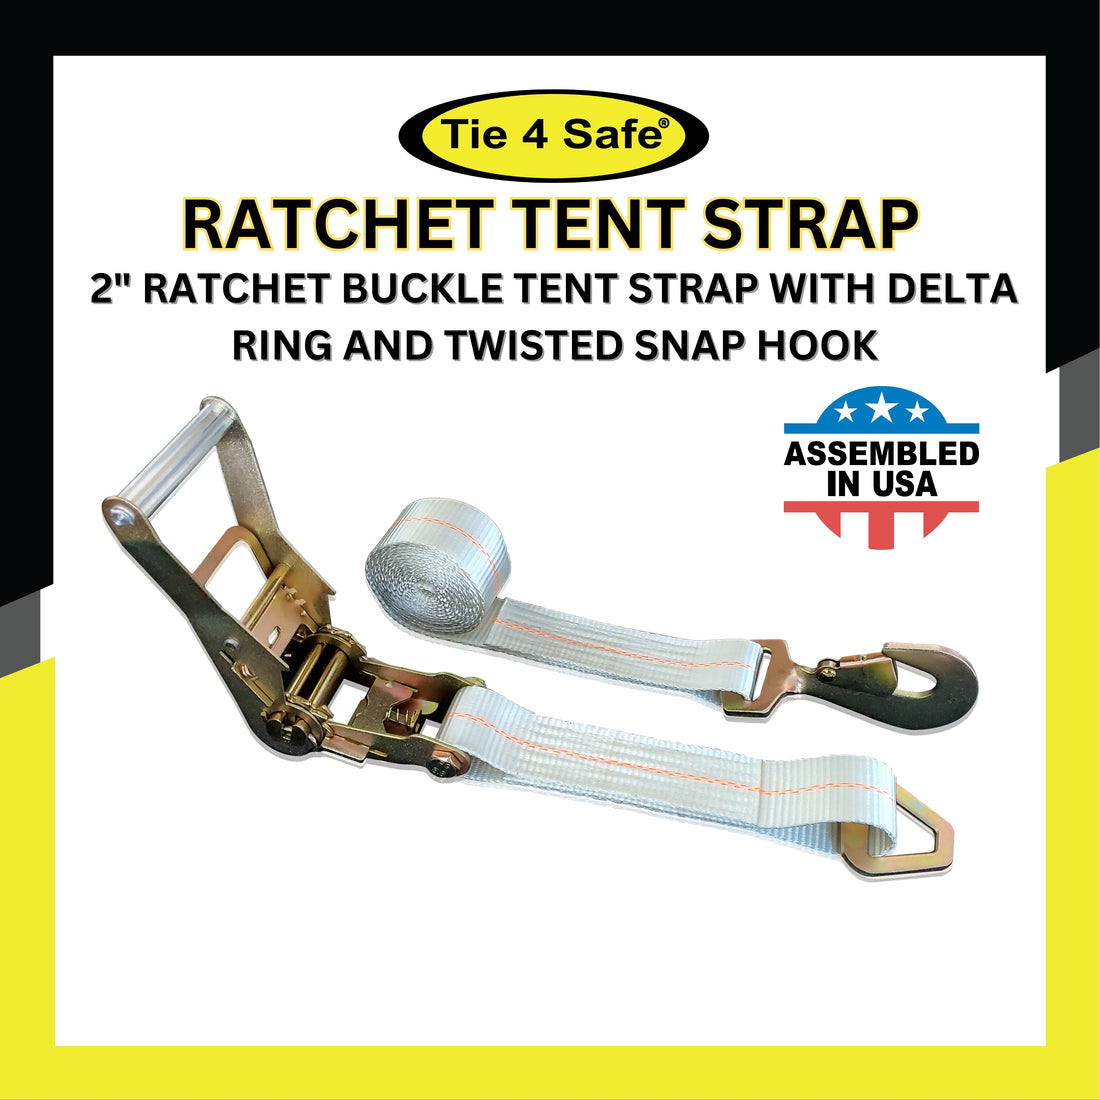 2" Ratchet Buckle Tent Strap With Delta Ring And Twisted Snap Hook